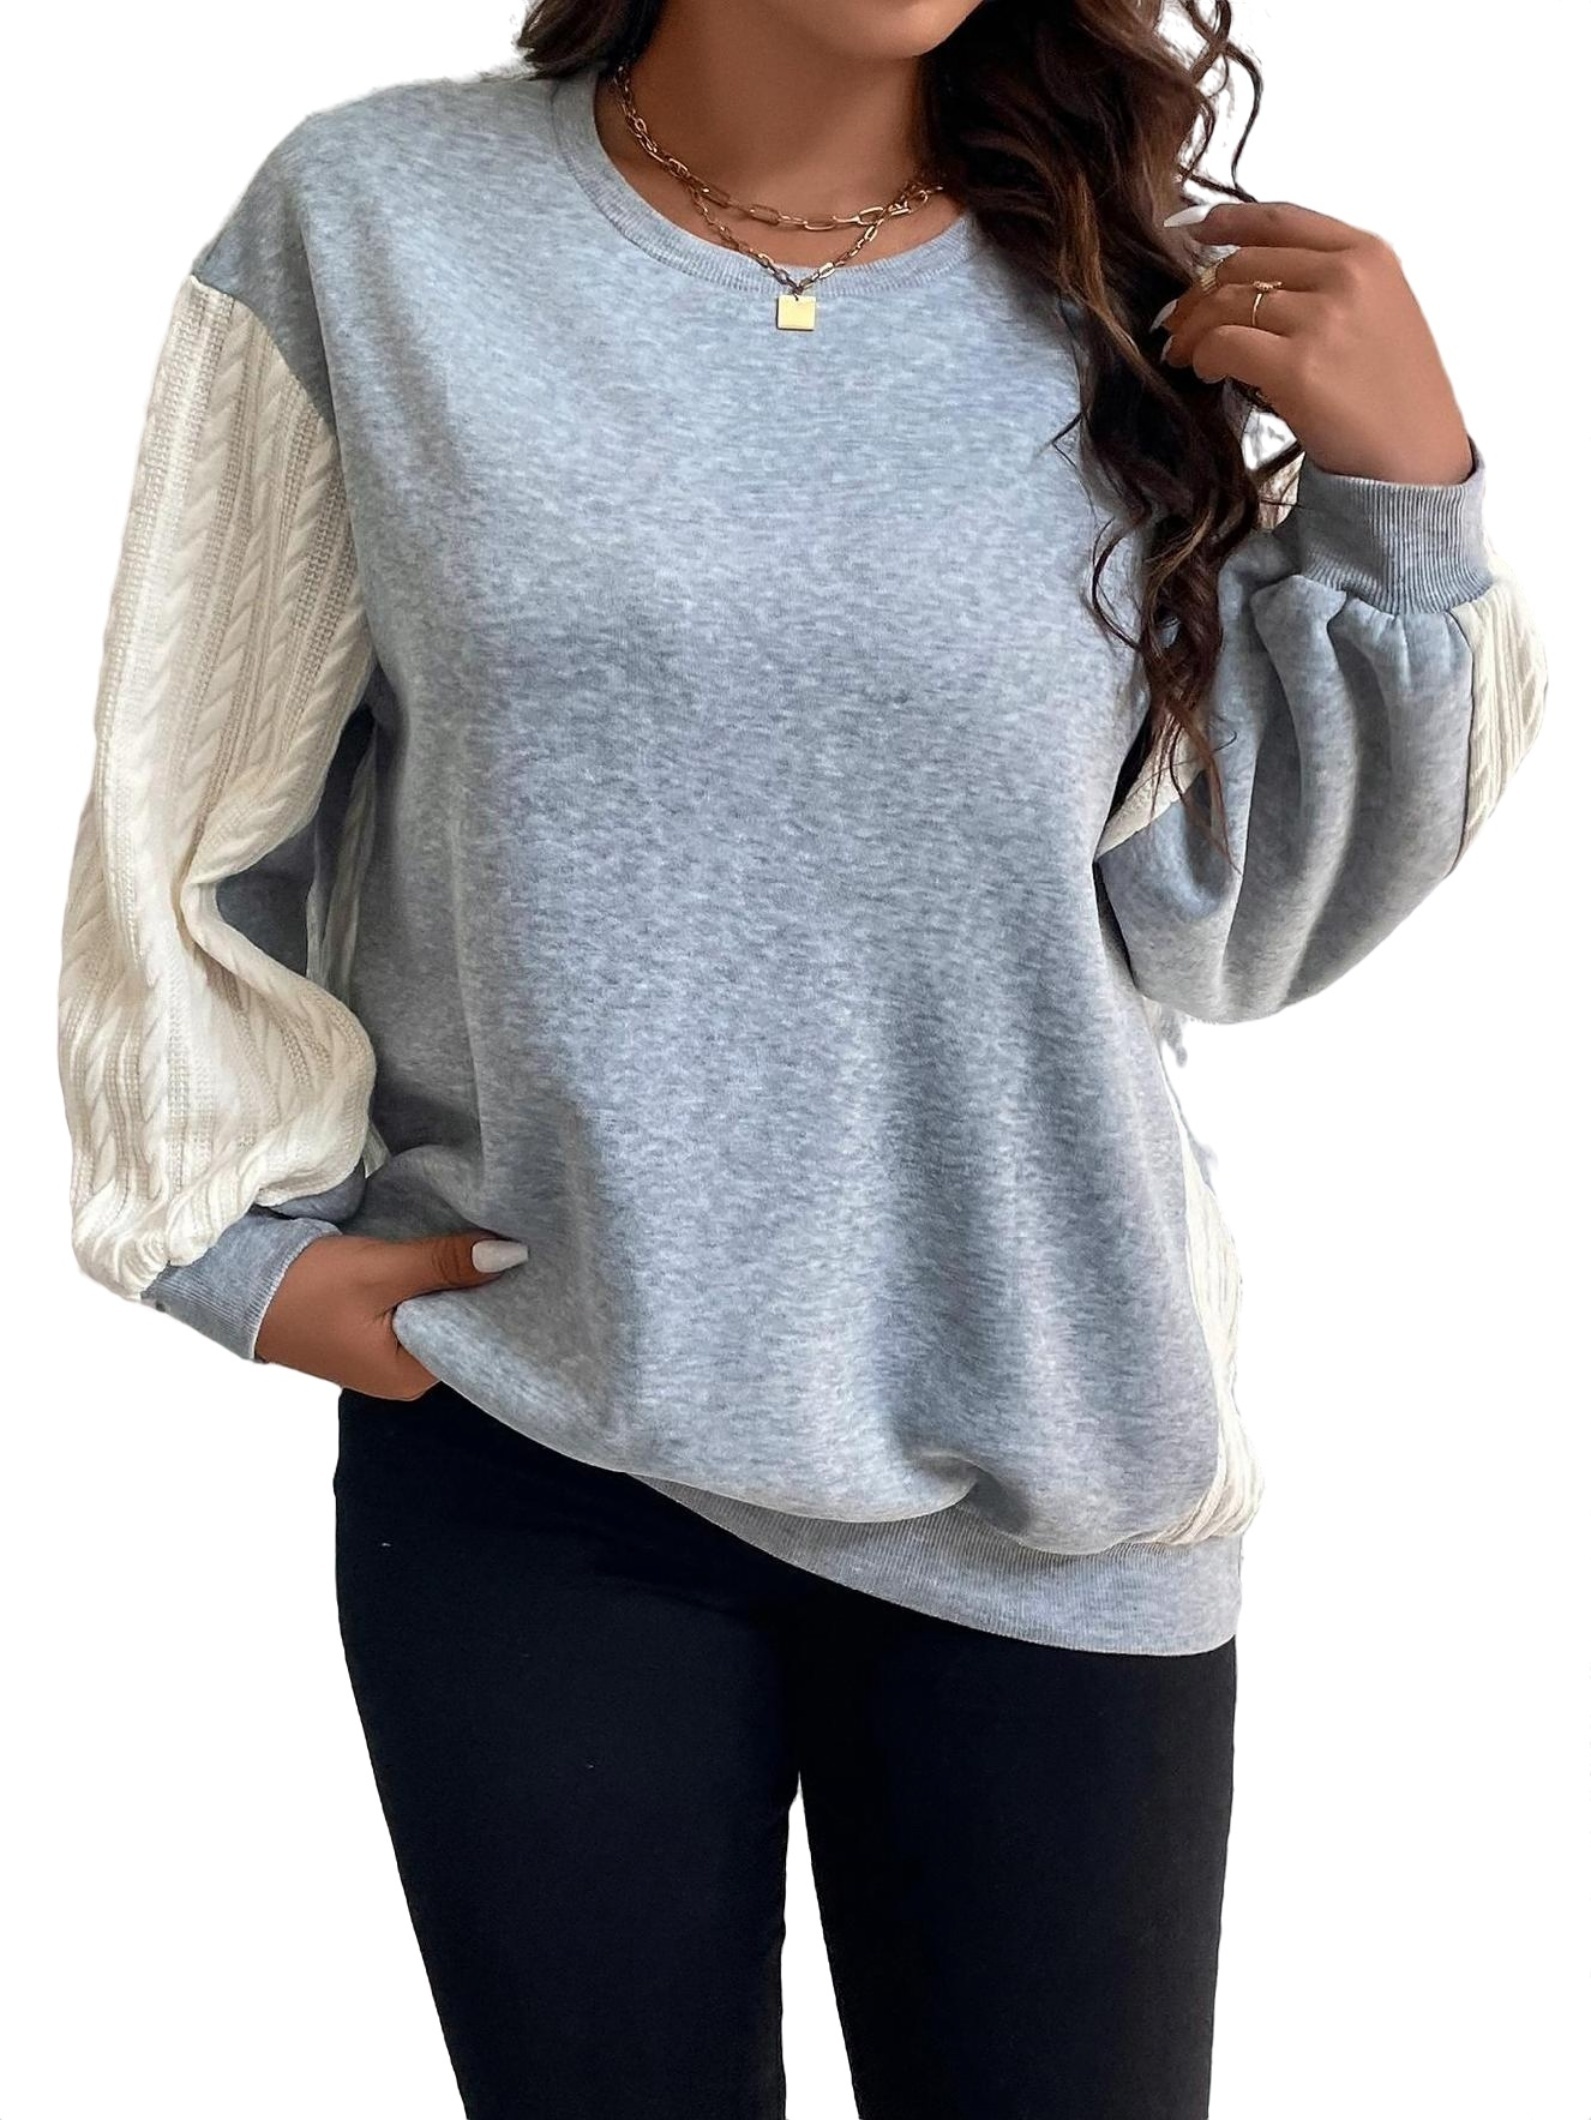 Casual Colorblock Pullovers Round Neck Light Grey Plus Size Sweatshirts ...